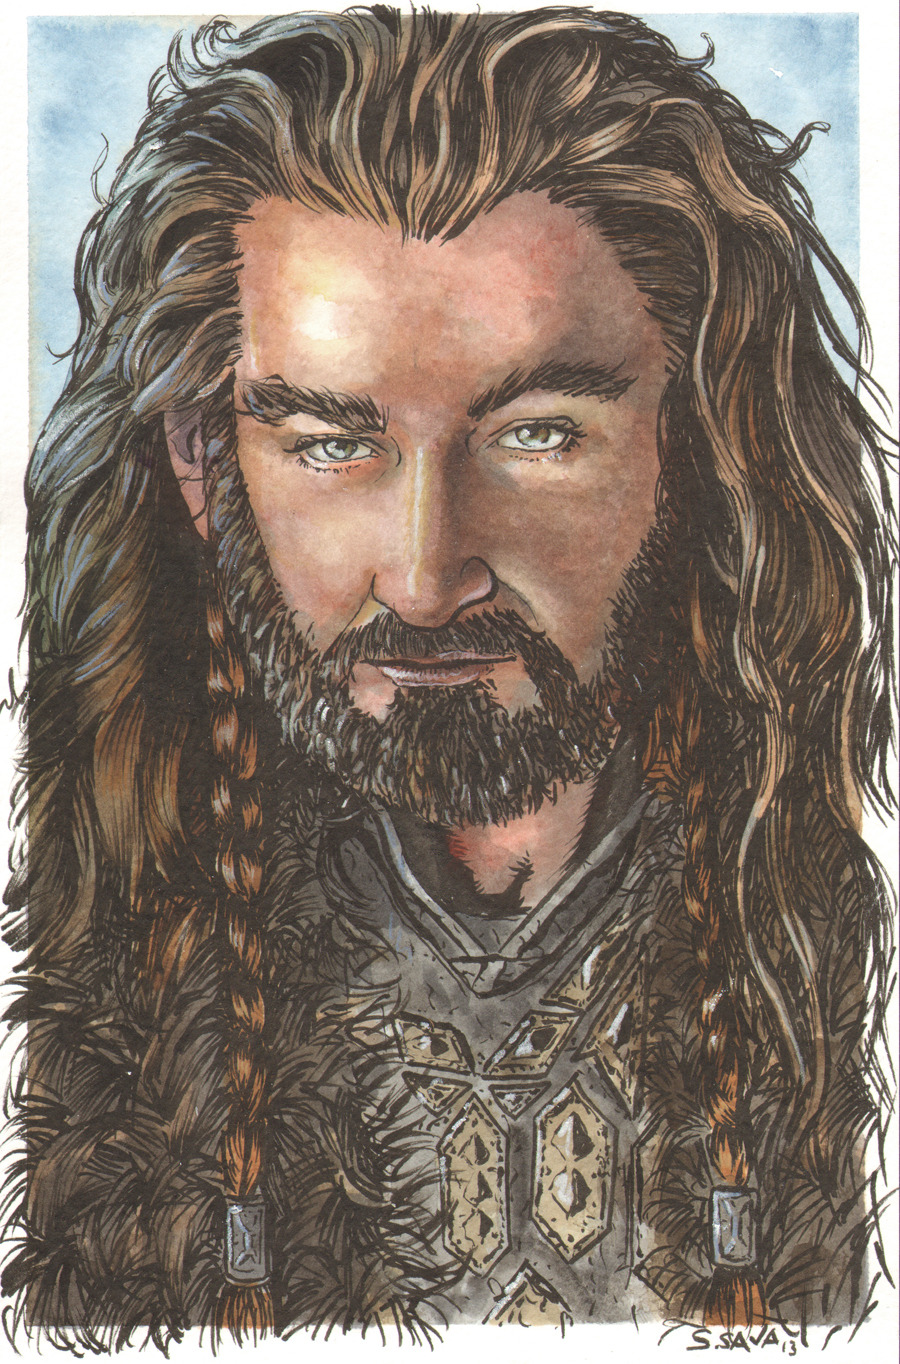 Thorin Oakenshield from the Hobbit Original Watercolor Painting…Such a great character from the movie. Well done.Painting is 6x9 inches on Strathmore Watercolor paper.Done in inks and watercolors.You can see more of my work here…http://www.etsy.com/shop/ScottChristianSavaThanks